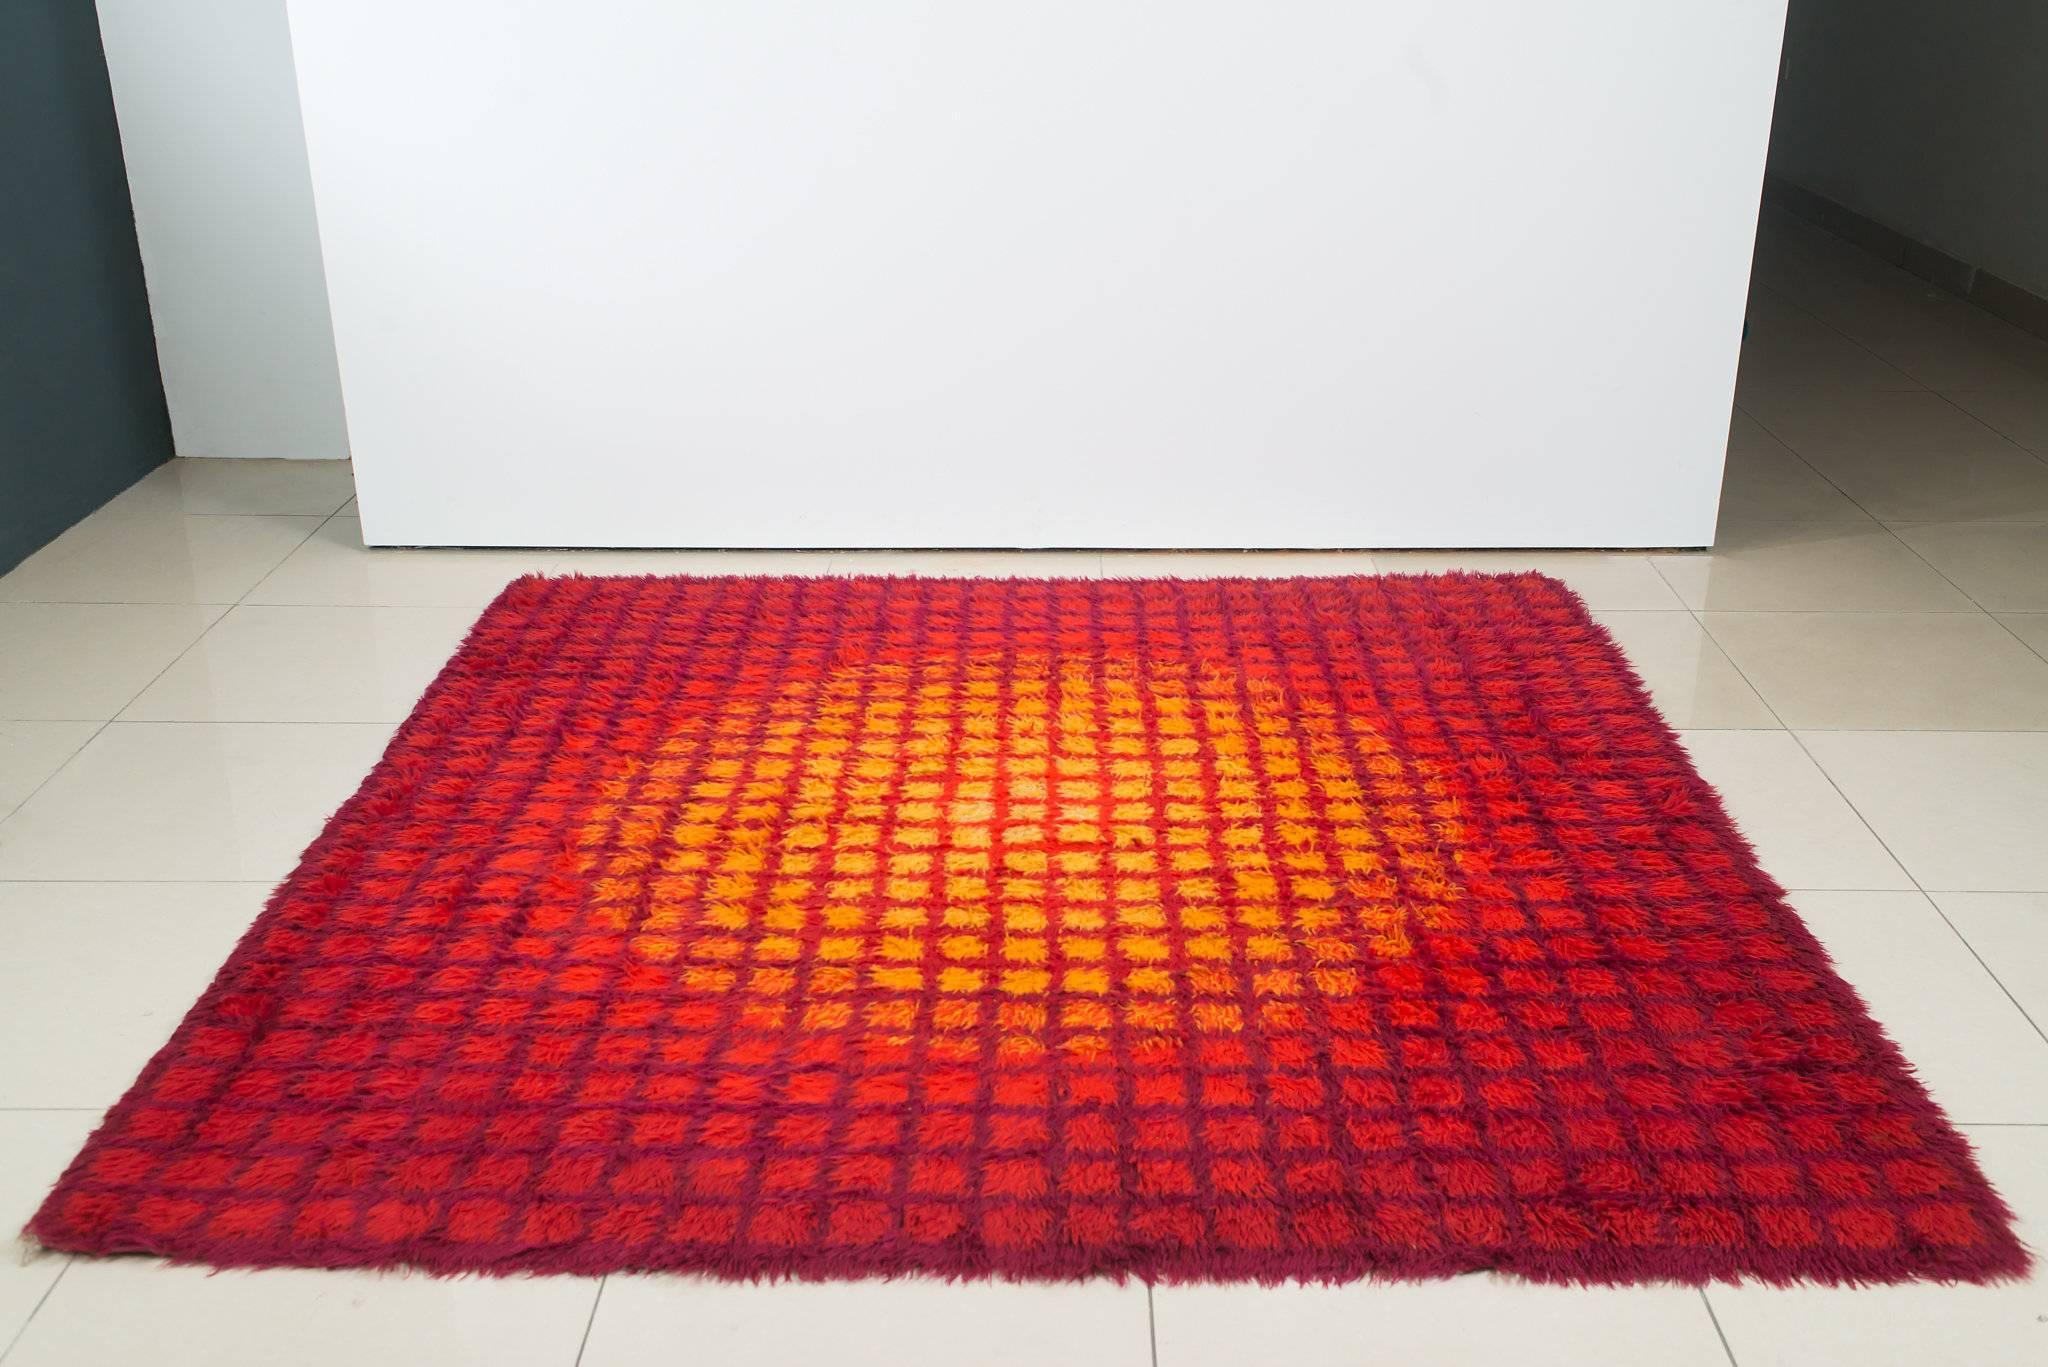 1970s geometric Scandinavian Rya rug. Executed in in orange, red yellow and bluish-purple wool. Rich texture and modern abstract lines artfully woven into the high pile. Measures 88.58 inches long x wide. In excellent vintage condition.